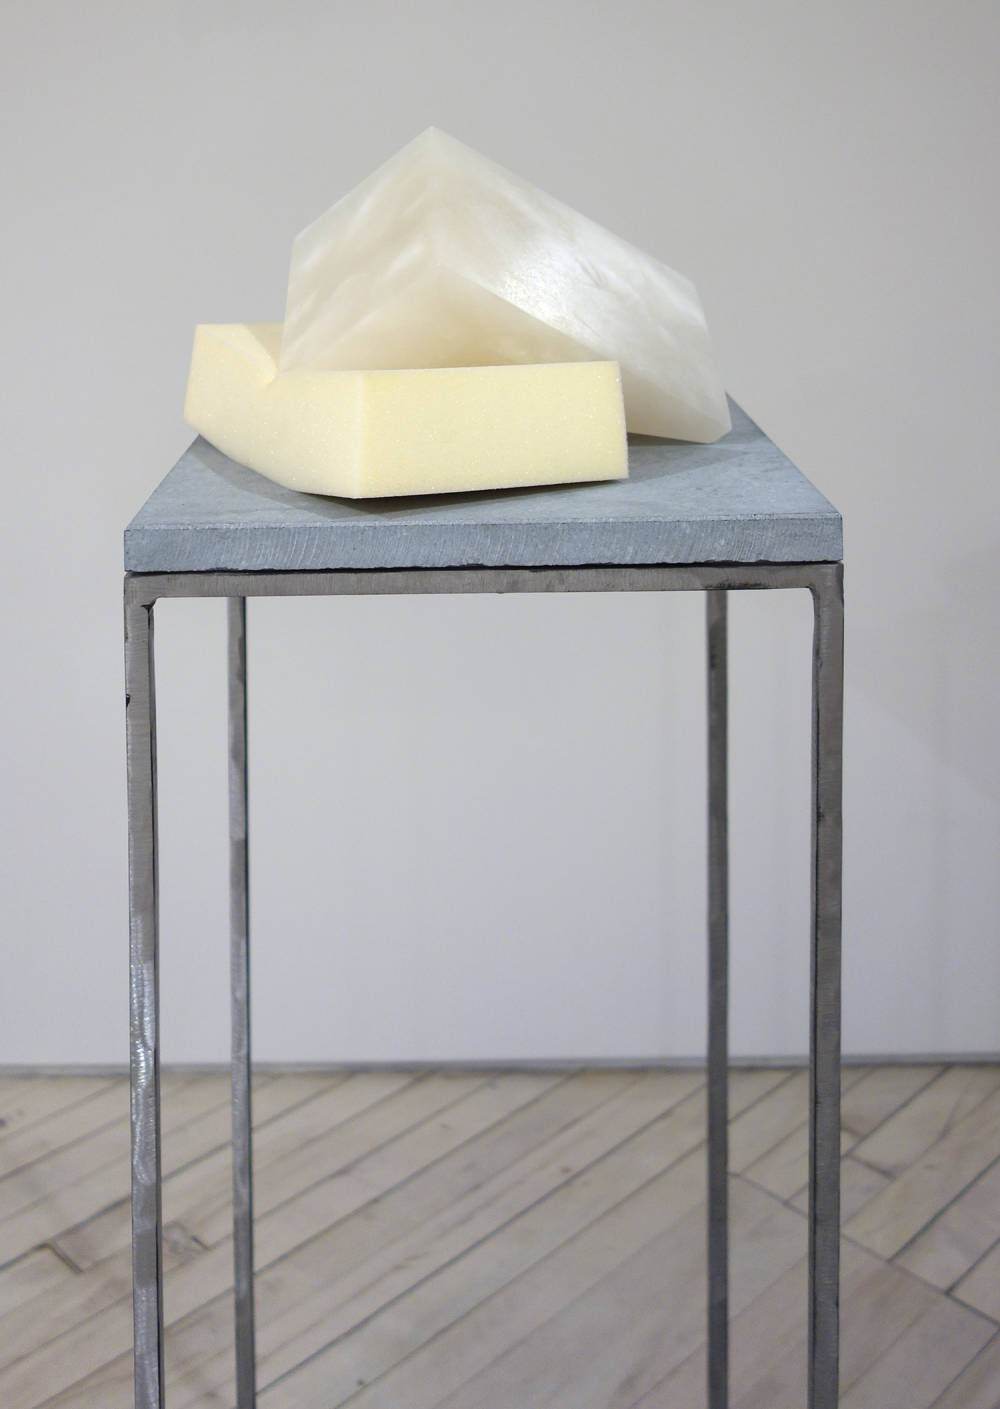 Atop a blue stone and steel plinth sits a rectangular block of white alabaster. There is a triangular piece of the alabaster cut from the block, and it is resting on its side atop block of memory foam pressing into the foam.